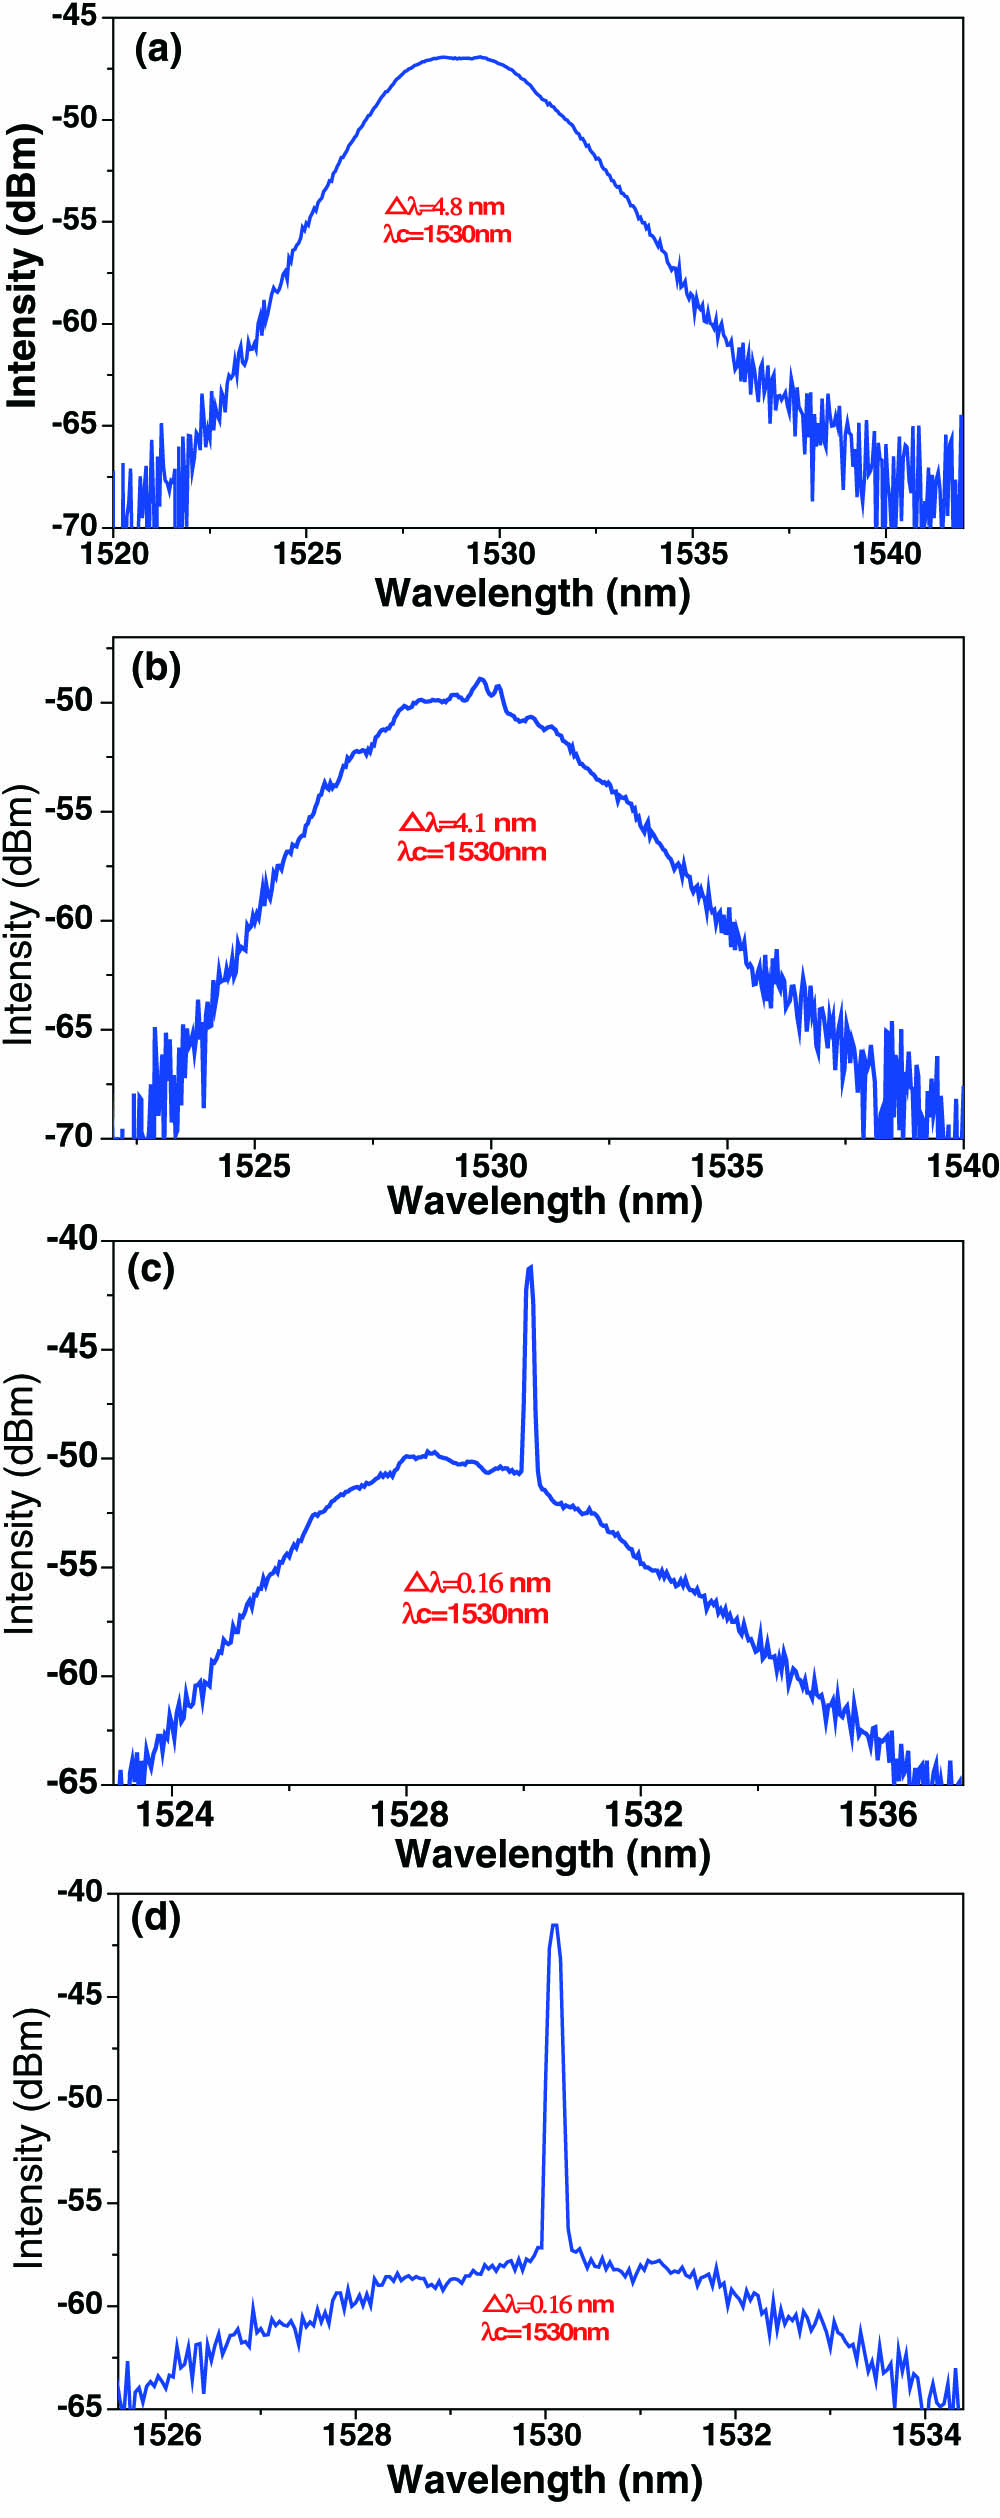 Different optical spectra of dark solitons are obtained with the different polarization states when we rotate HWPs and QWPs in the fiber laser. (a) The optical spectrum is smooth with the 4.8 nm spectral width at 1530 nm. (b) The optical spectrum is a bit rough with the 4.1 nm spectral width. (c) and (d) both have the 0.16 nm spectral width.